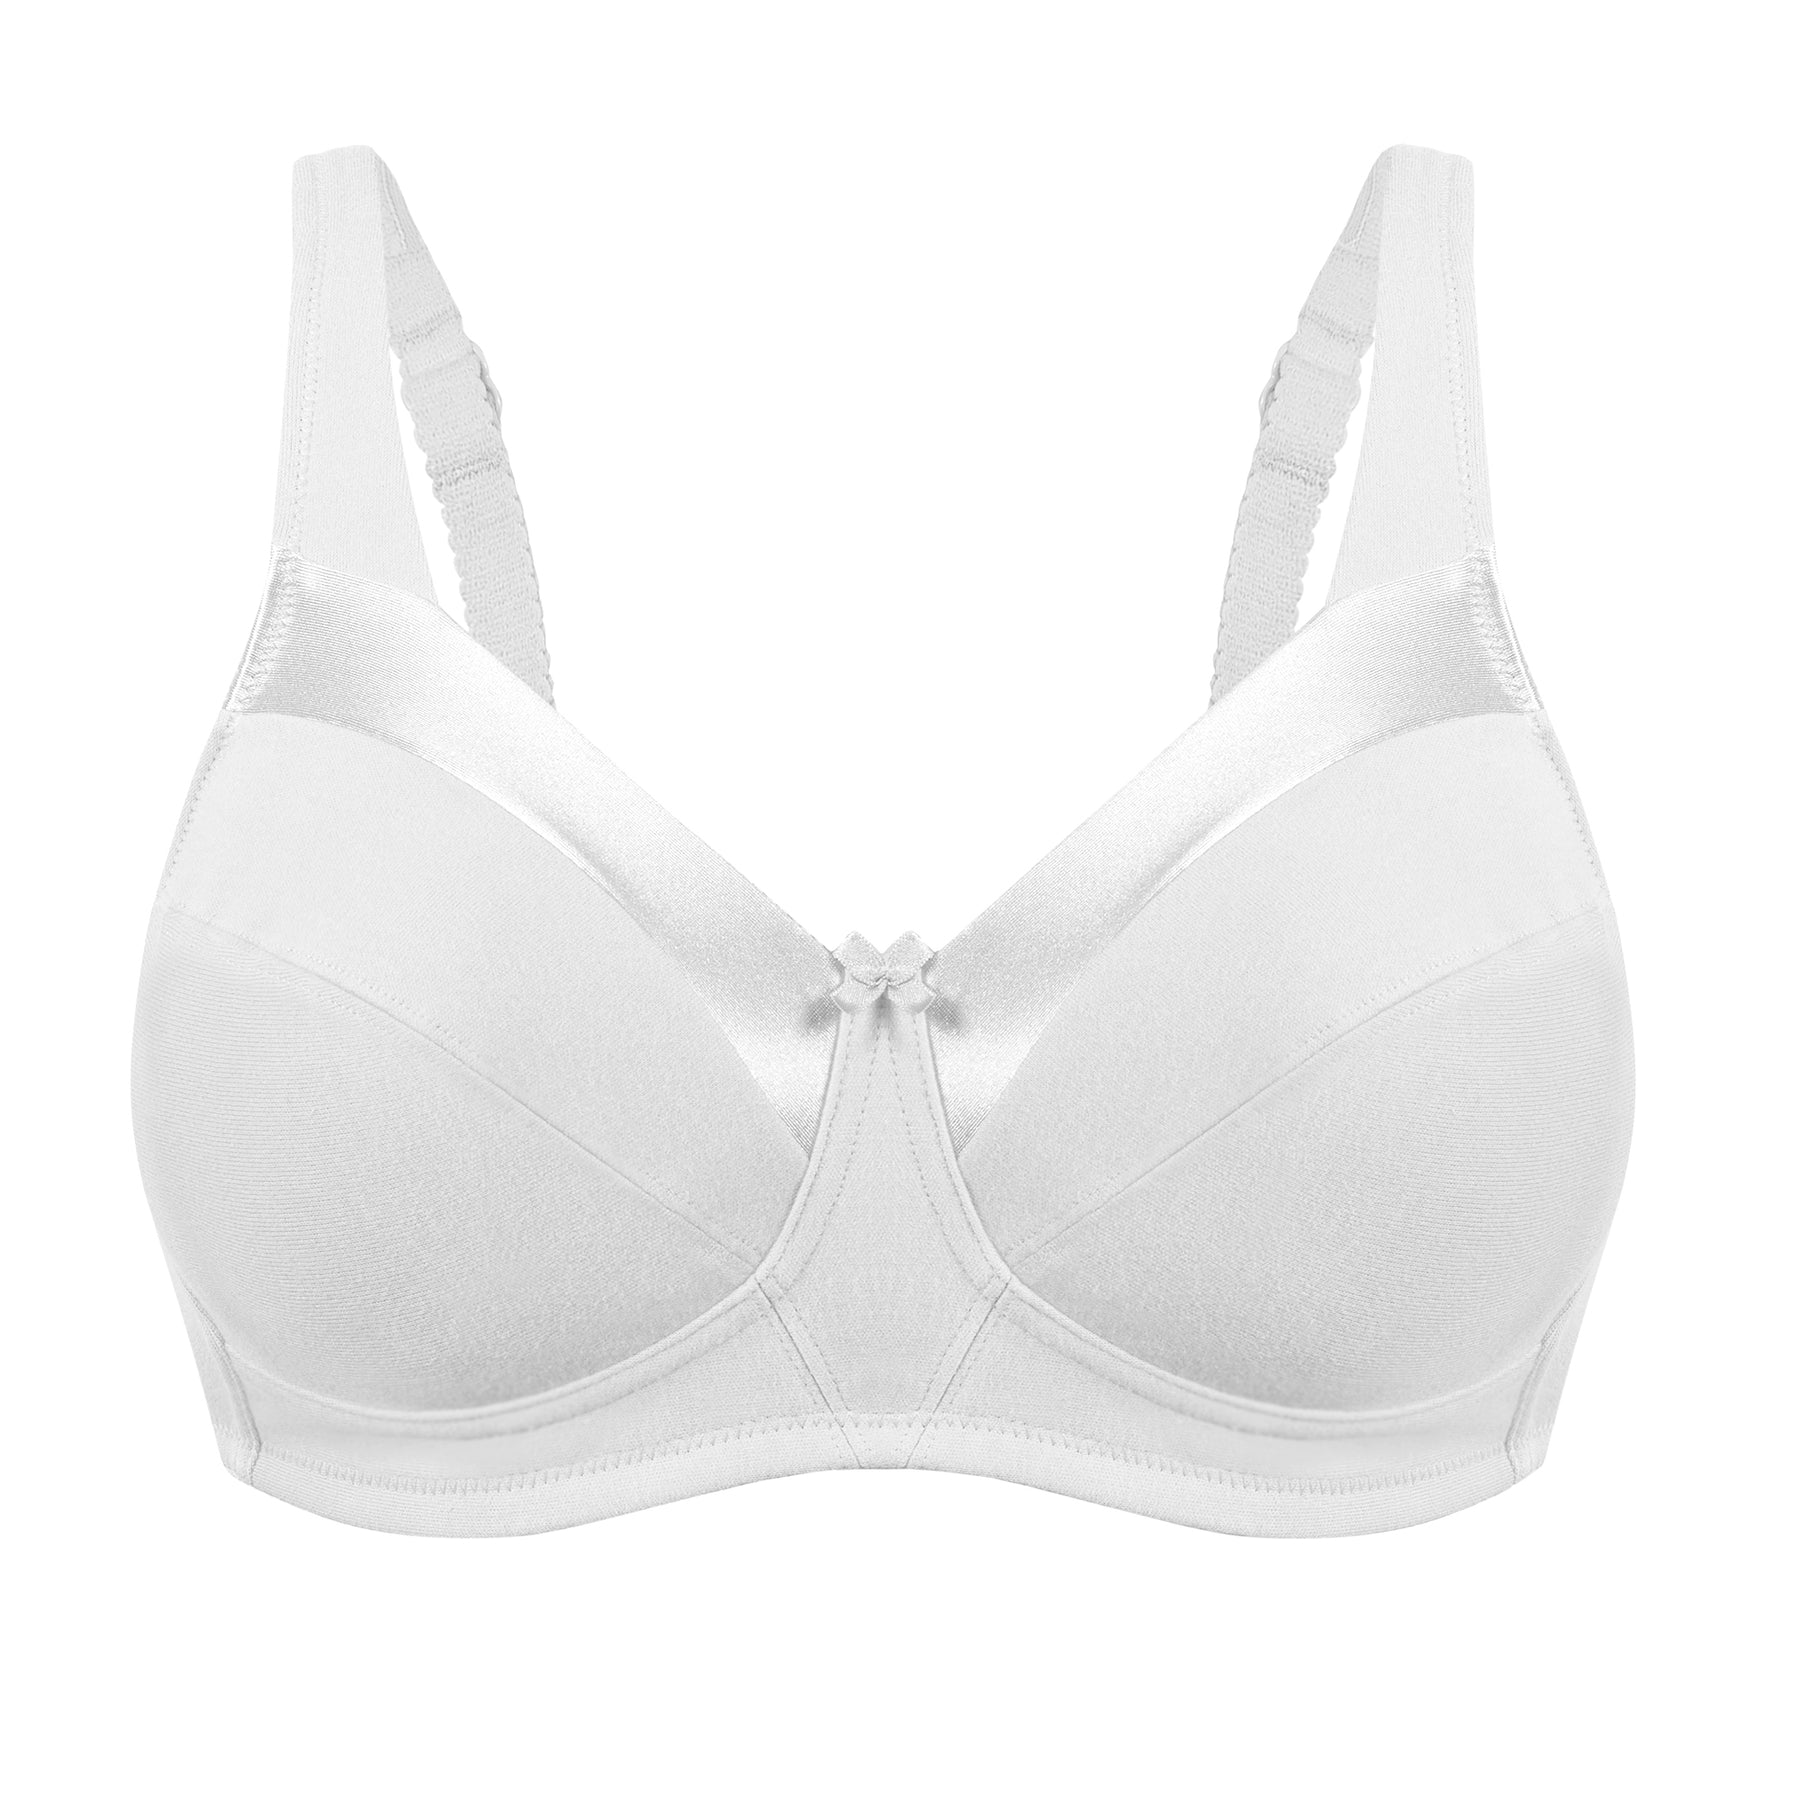 Plusform Instant Shaping Satin Deluster Soft Cup Bra 4818